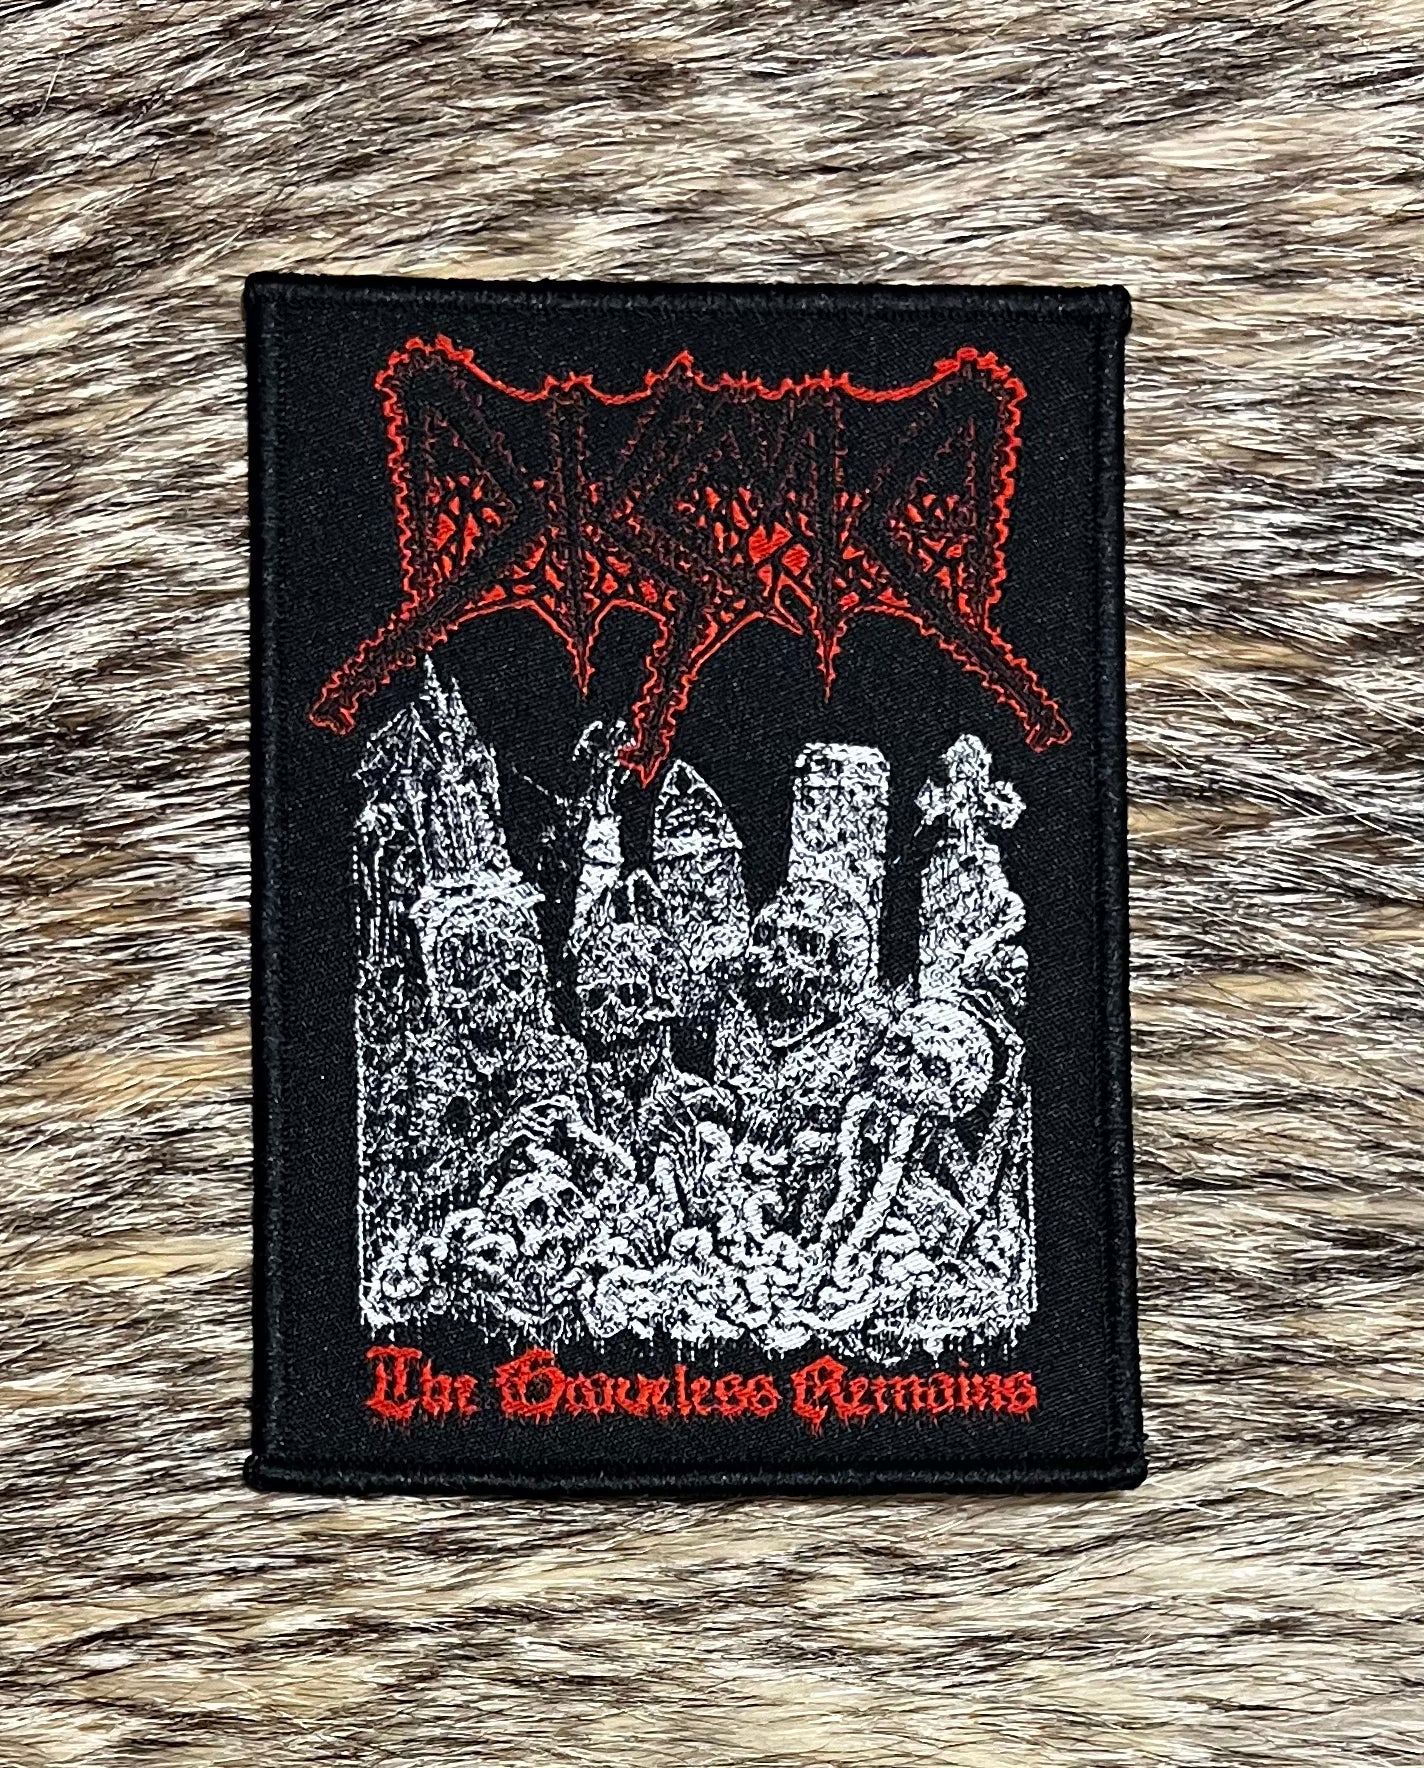 Disma - The Graveless Remains Patch